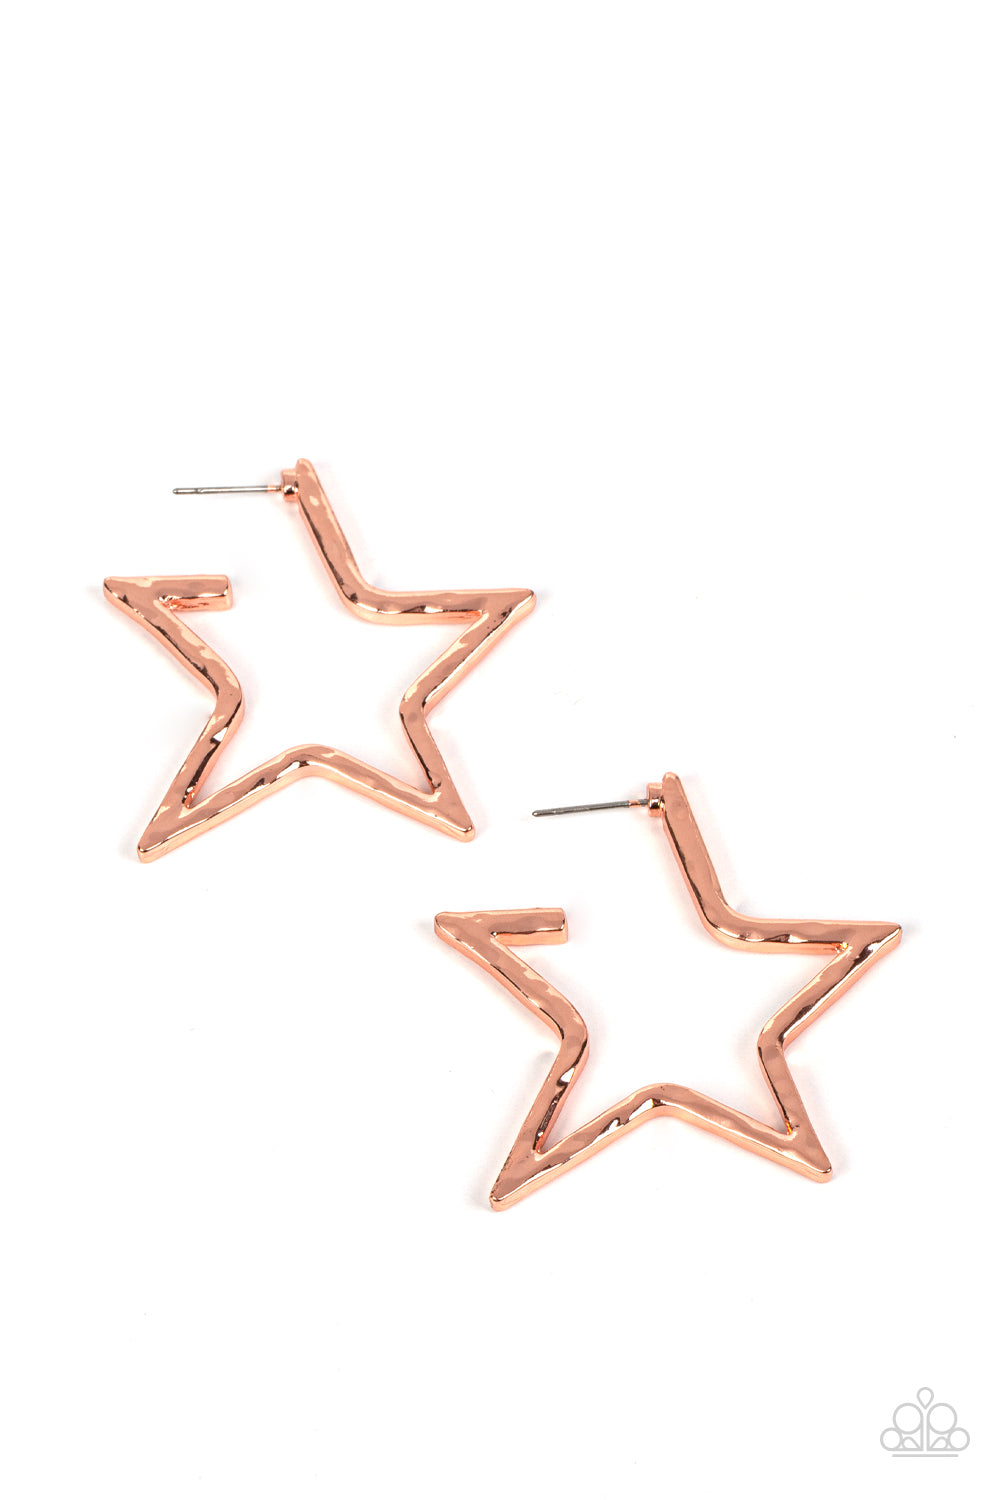 All-Star Attitude - Copper Star Earrings a hammered shiny copper bar delicately folds into a star-shaped hoop, resulting in a stellar metallic shimmer. Earring attaches to a standard post fitting.  Sold as one pair of hoop earrings.